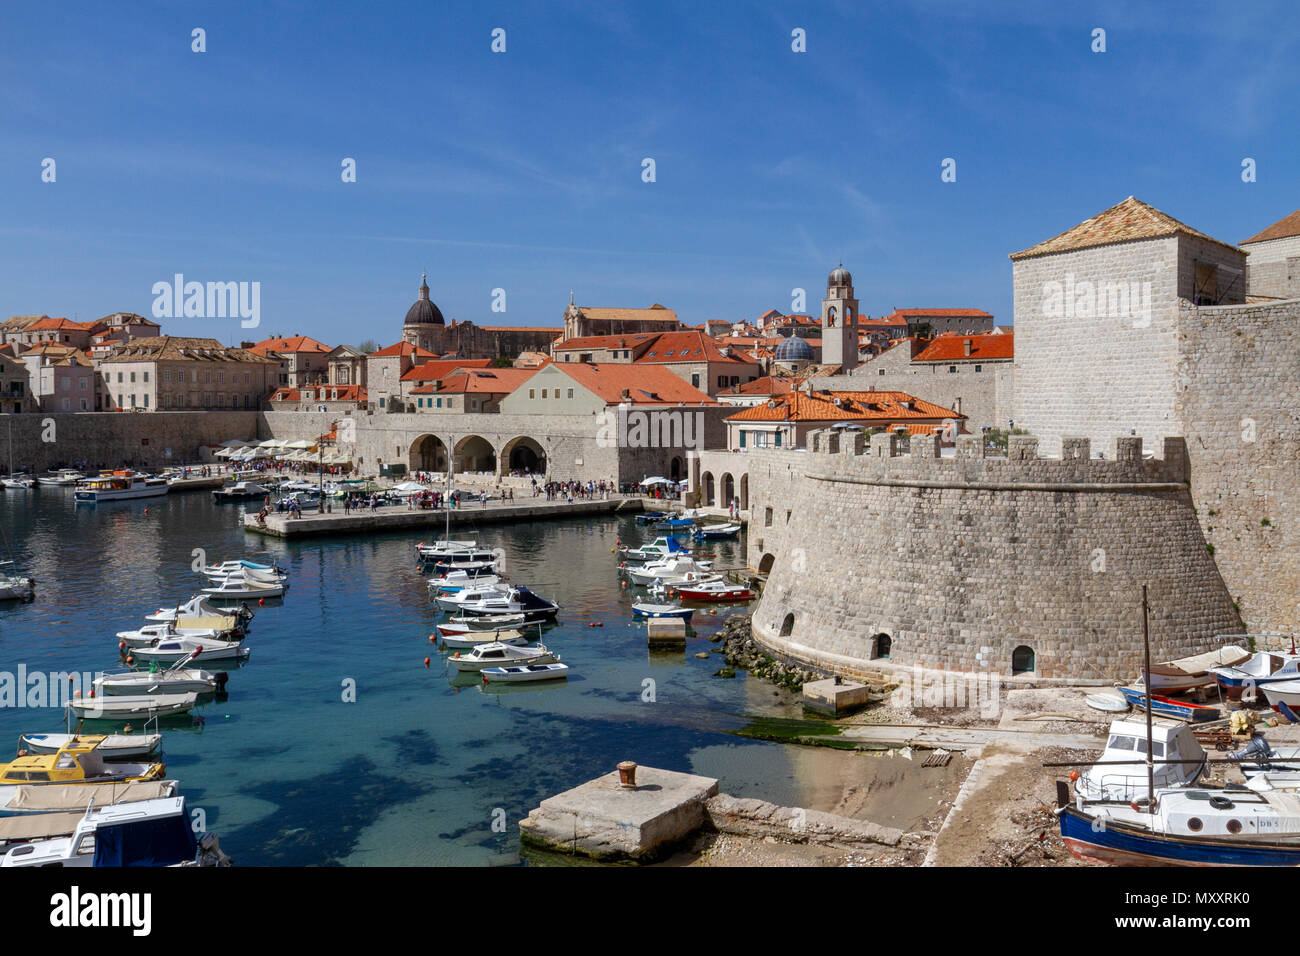 Red tiled roof and clear blue water of the Old City Harbour and the Old City Walls of the historic city of Dubrovnik, Croatia. Stock Photo